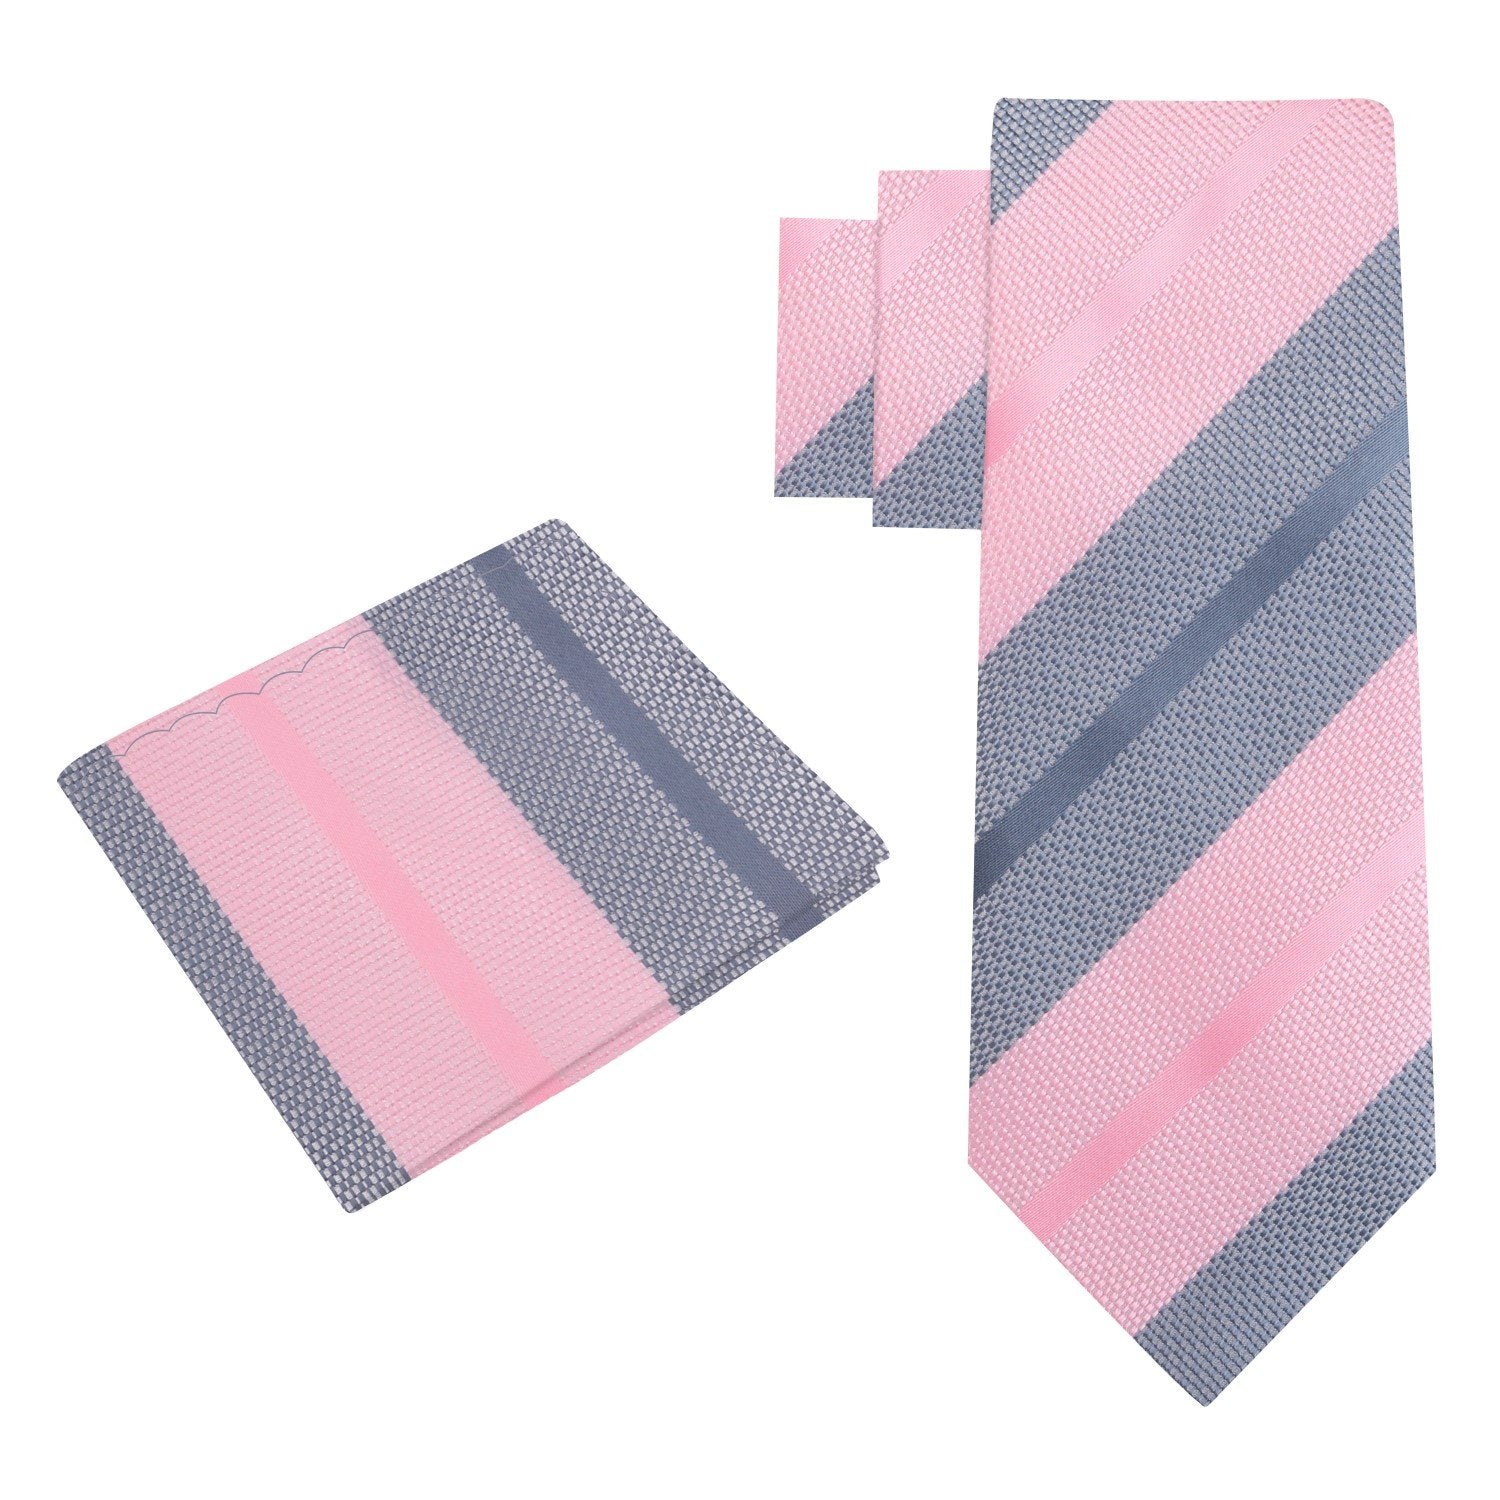 Alt View: Smokey Teal, Pink Tie and Square Regular Width